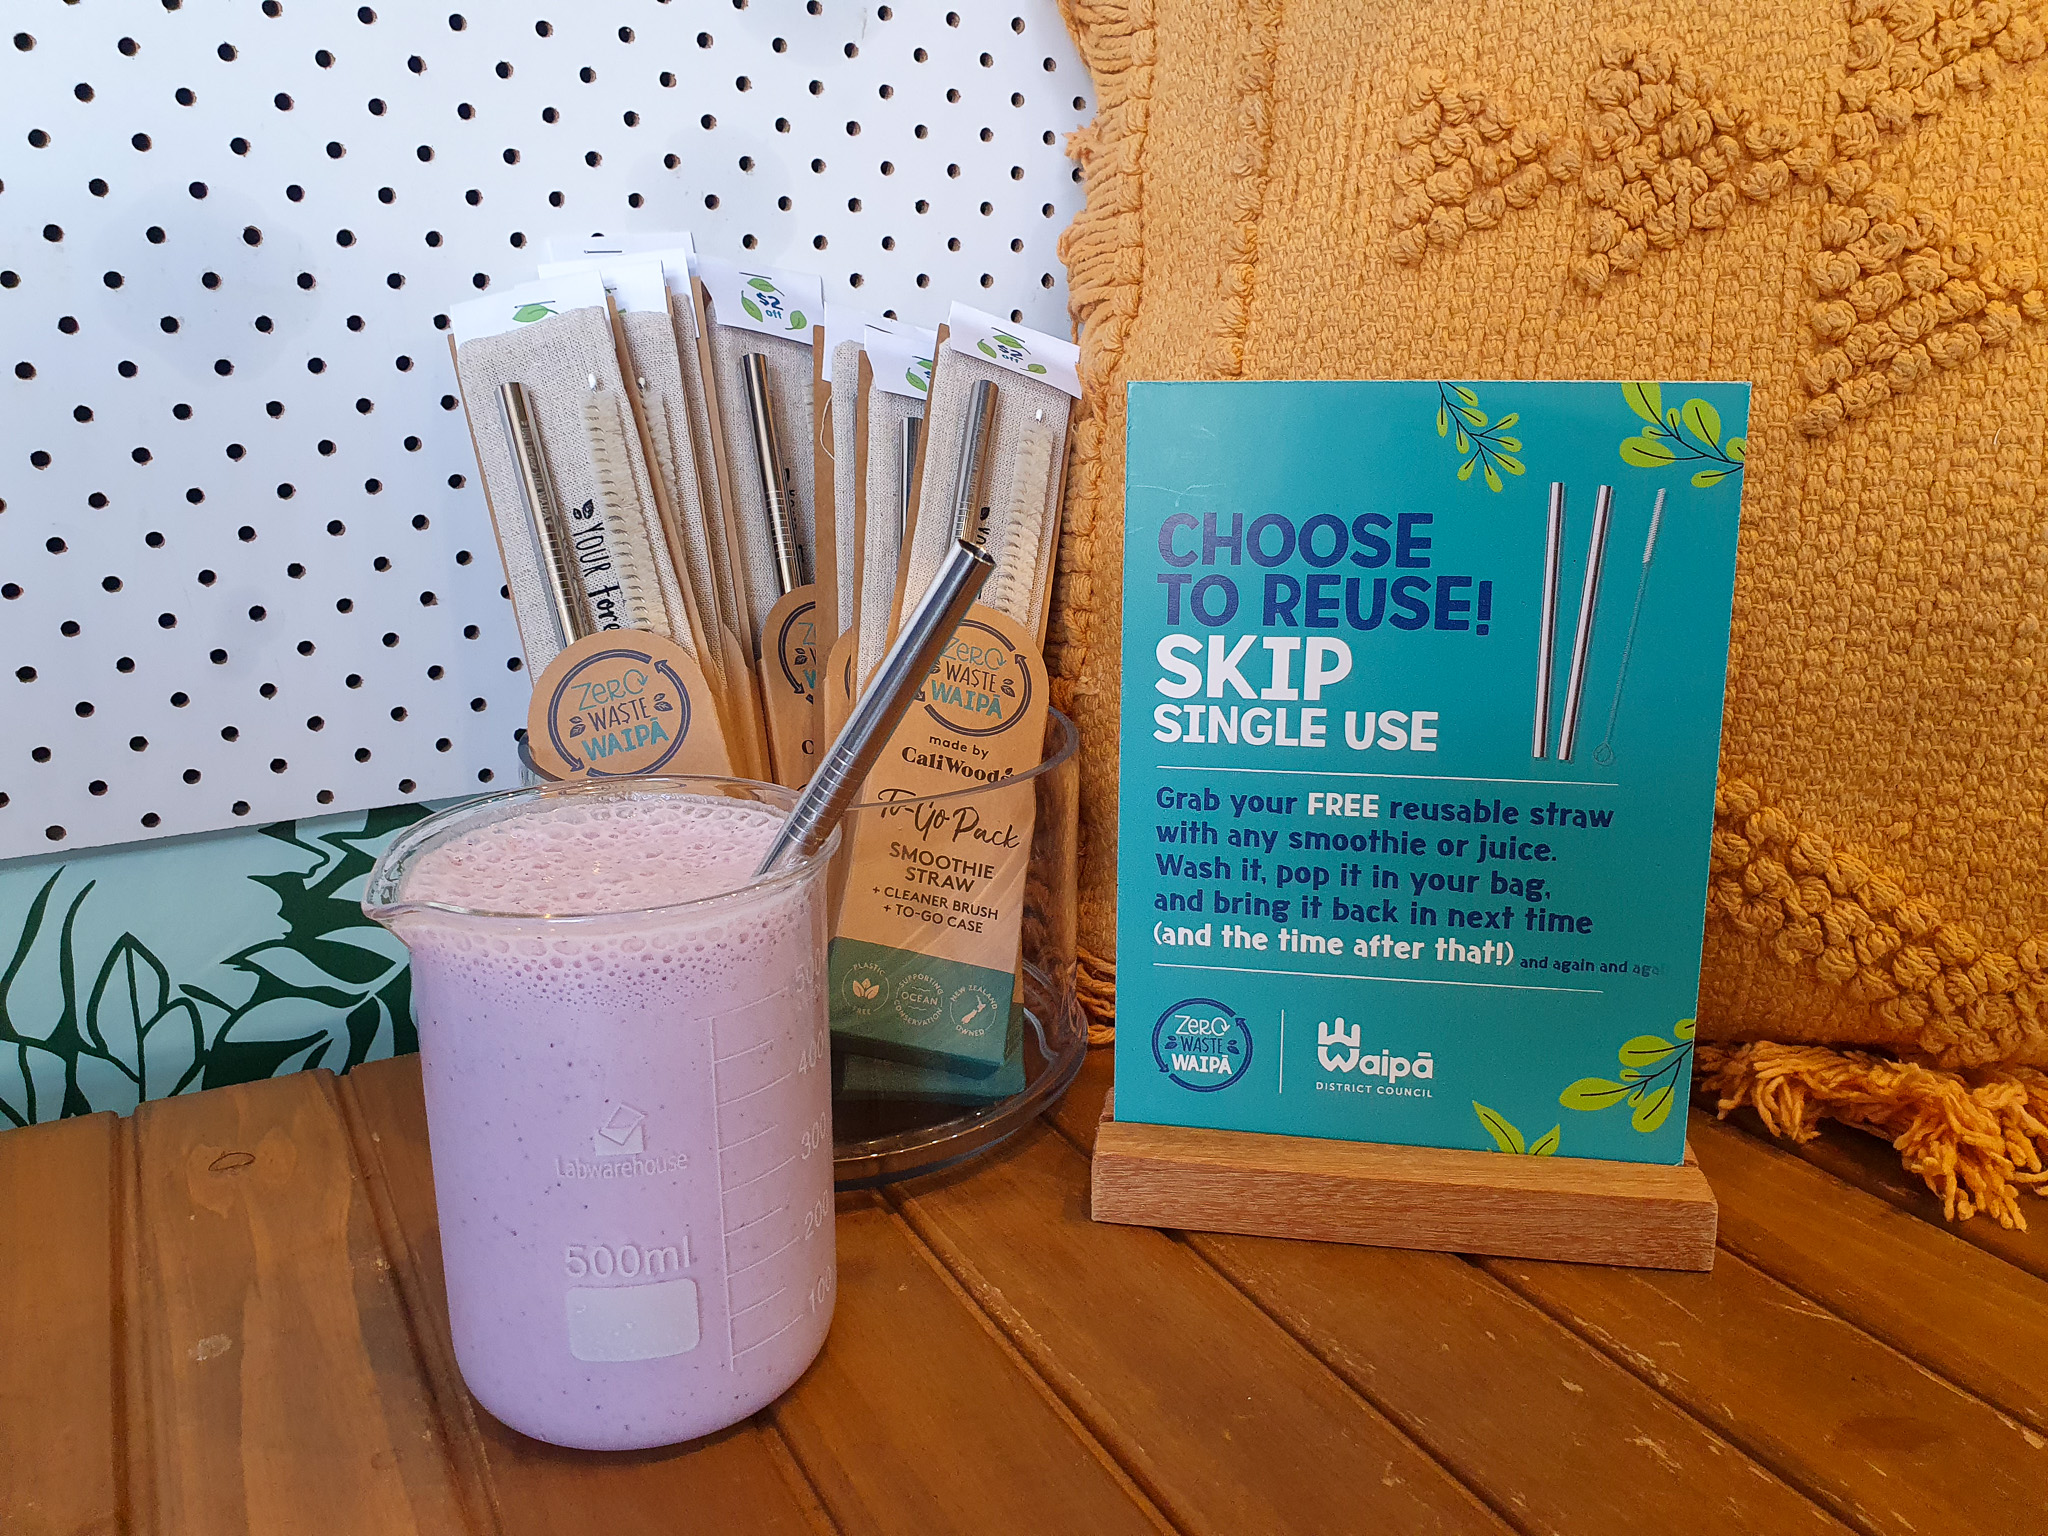 Reusable stainless straw in a smoothie cup 